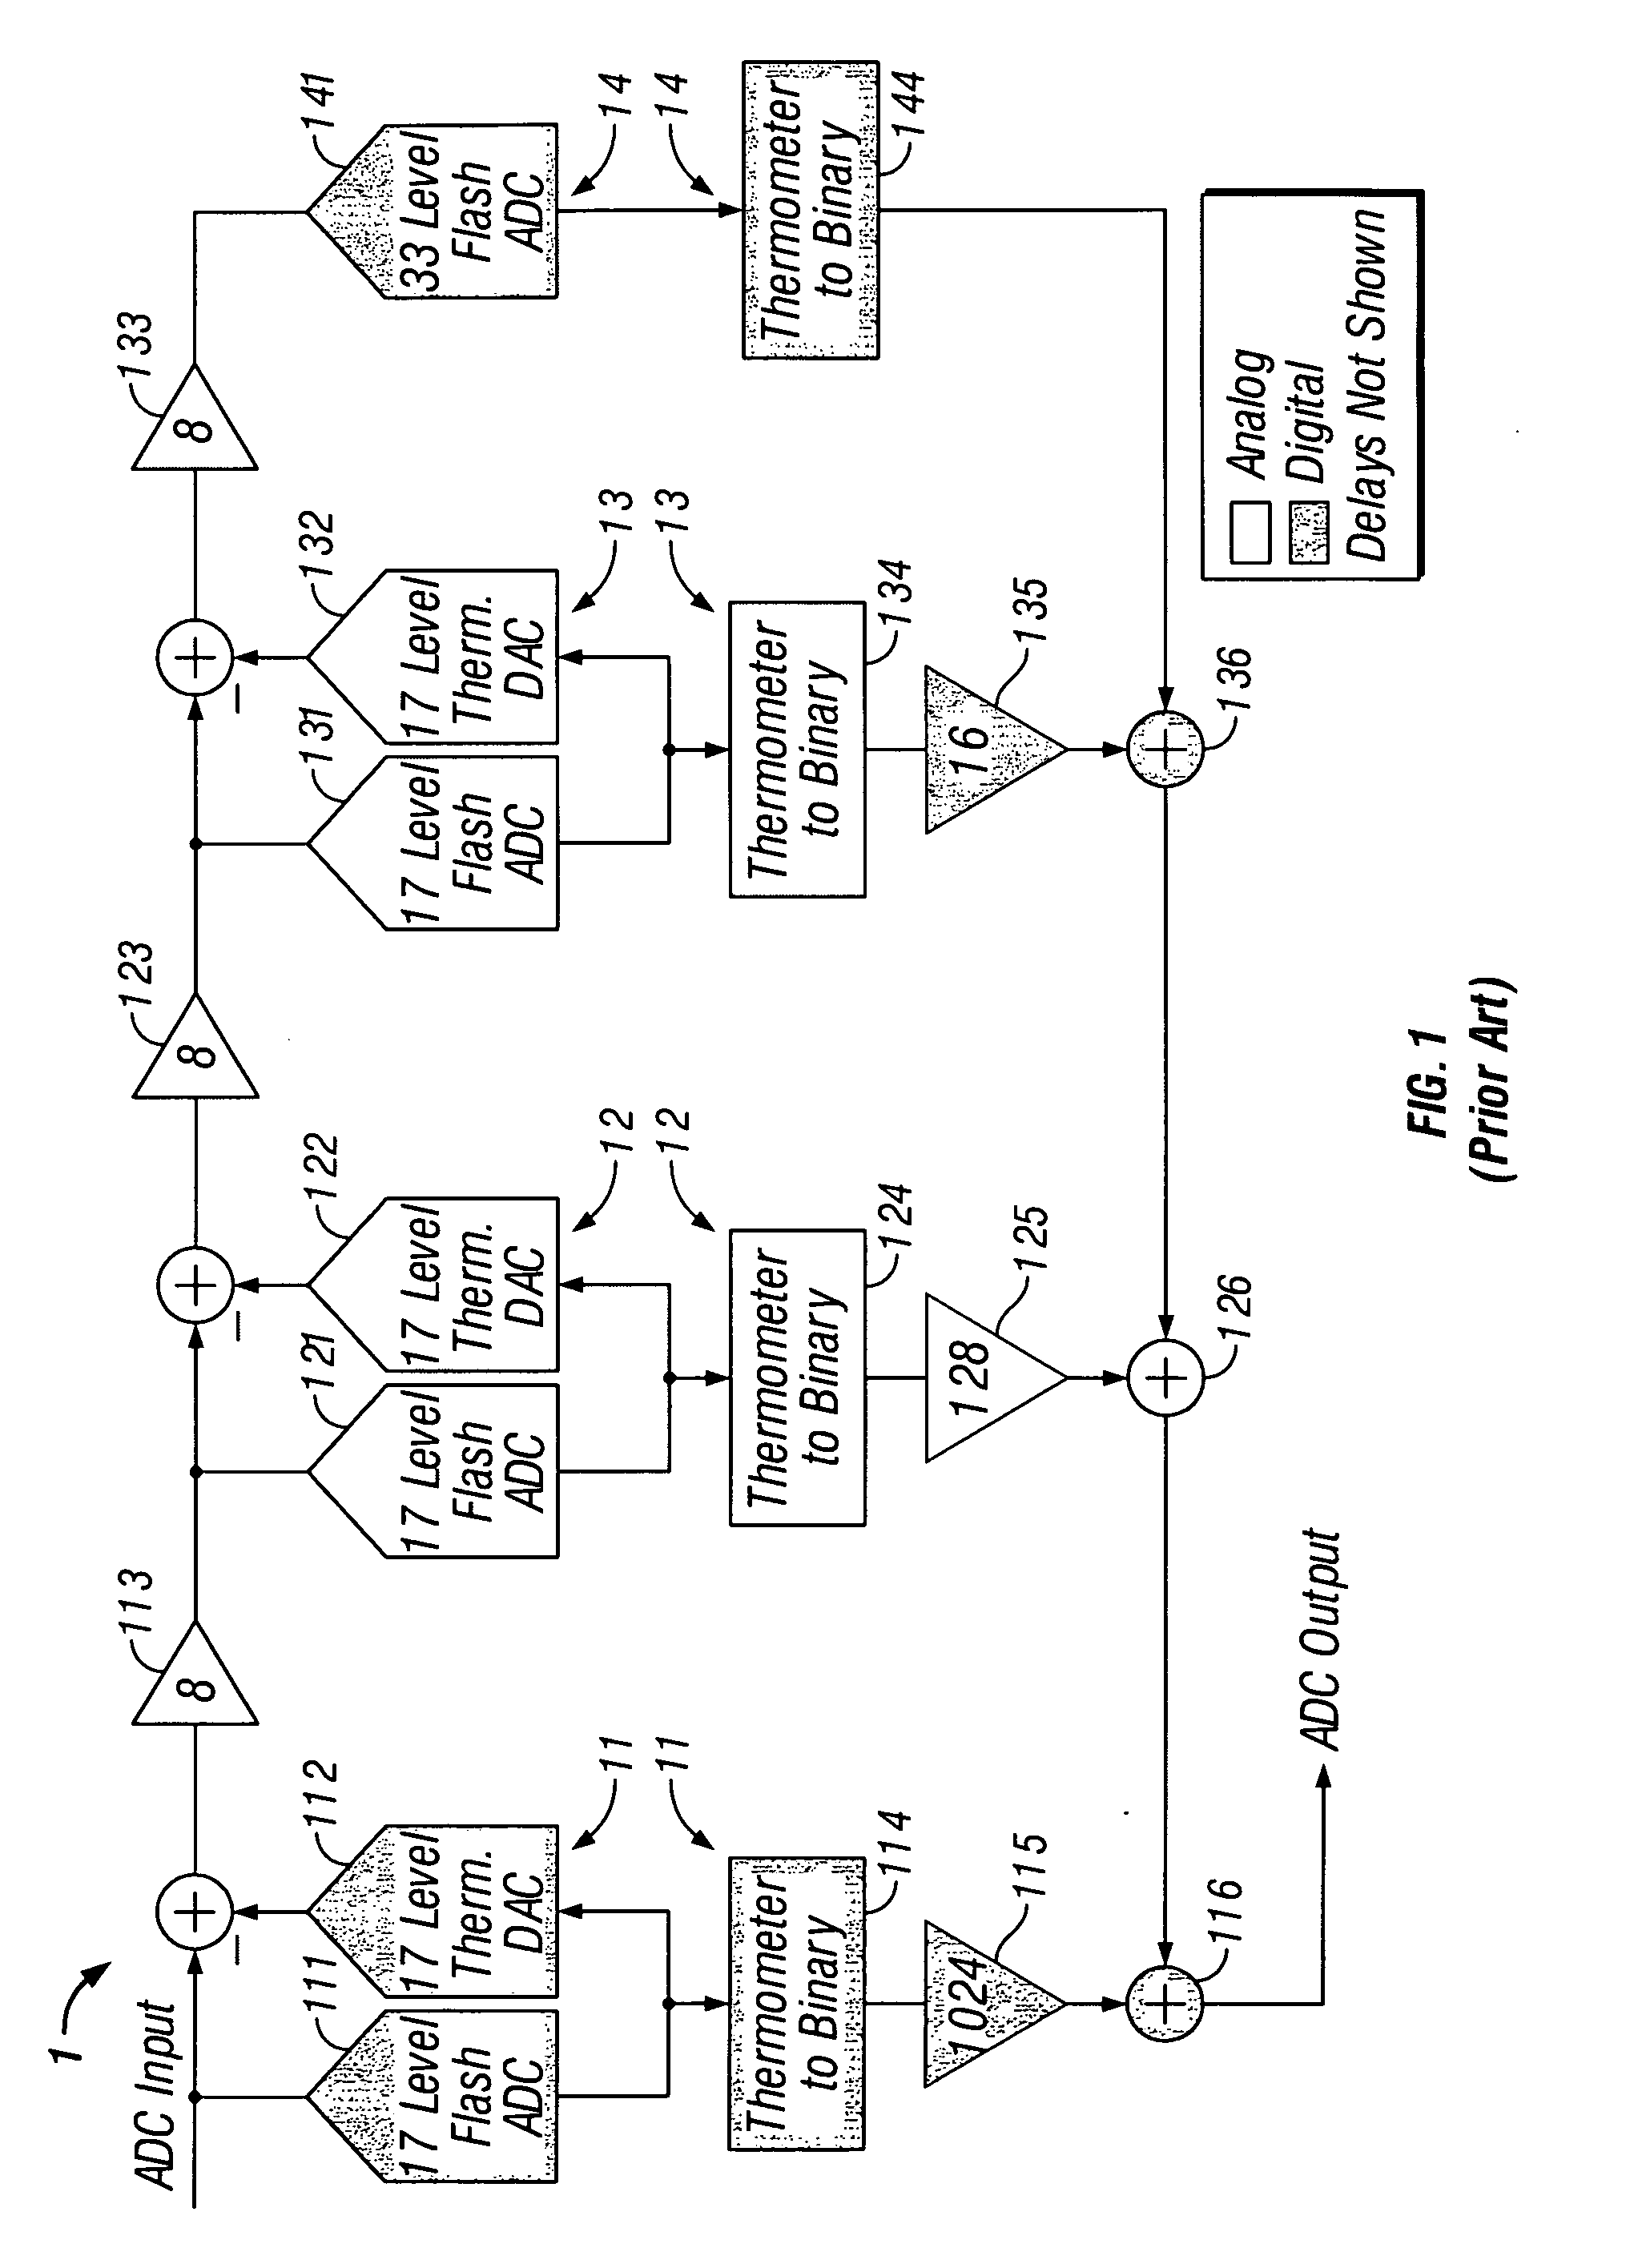 Digital background cancellation of digital to analog converter mismatch noise in analog to digital converters